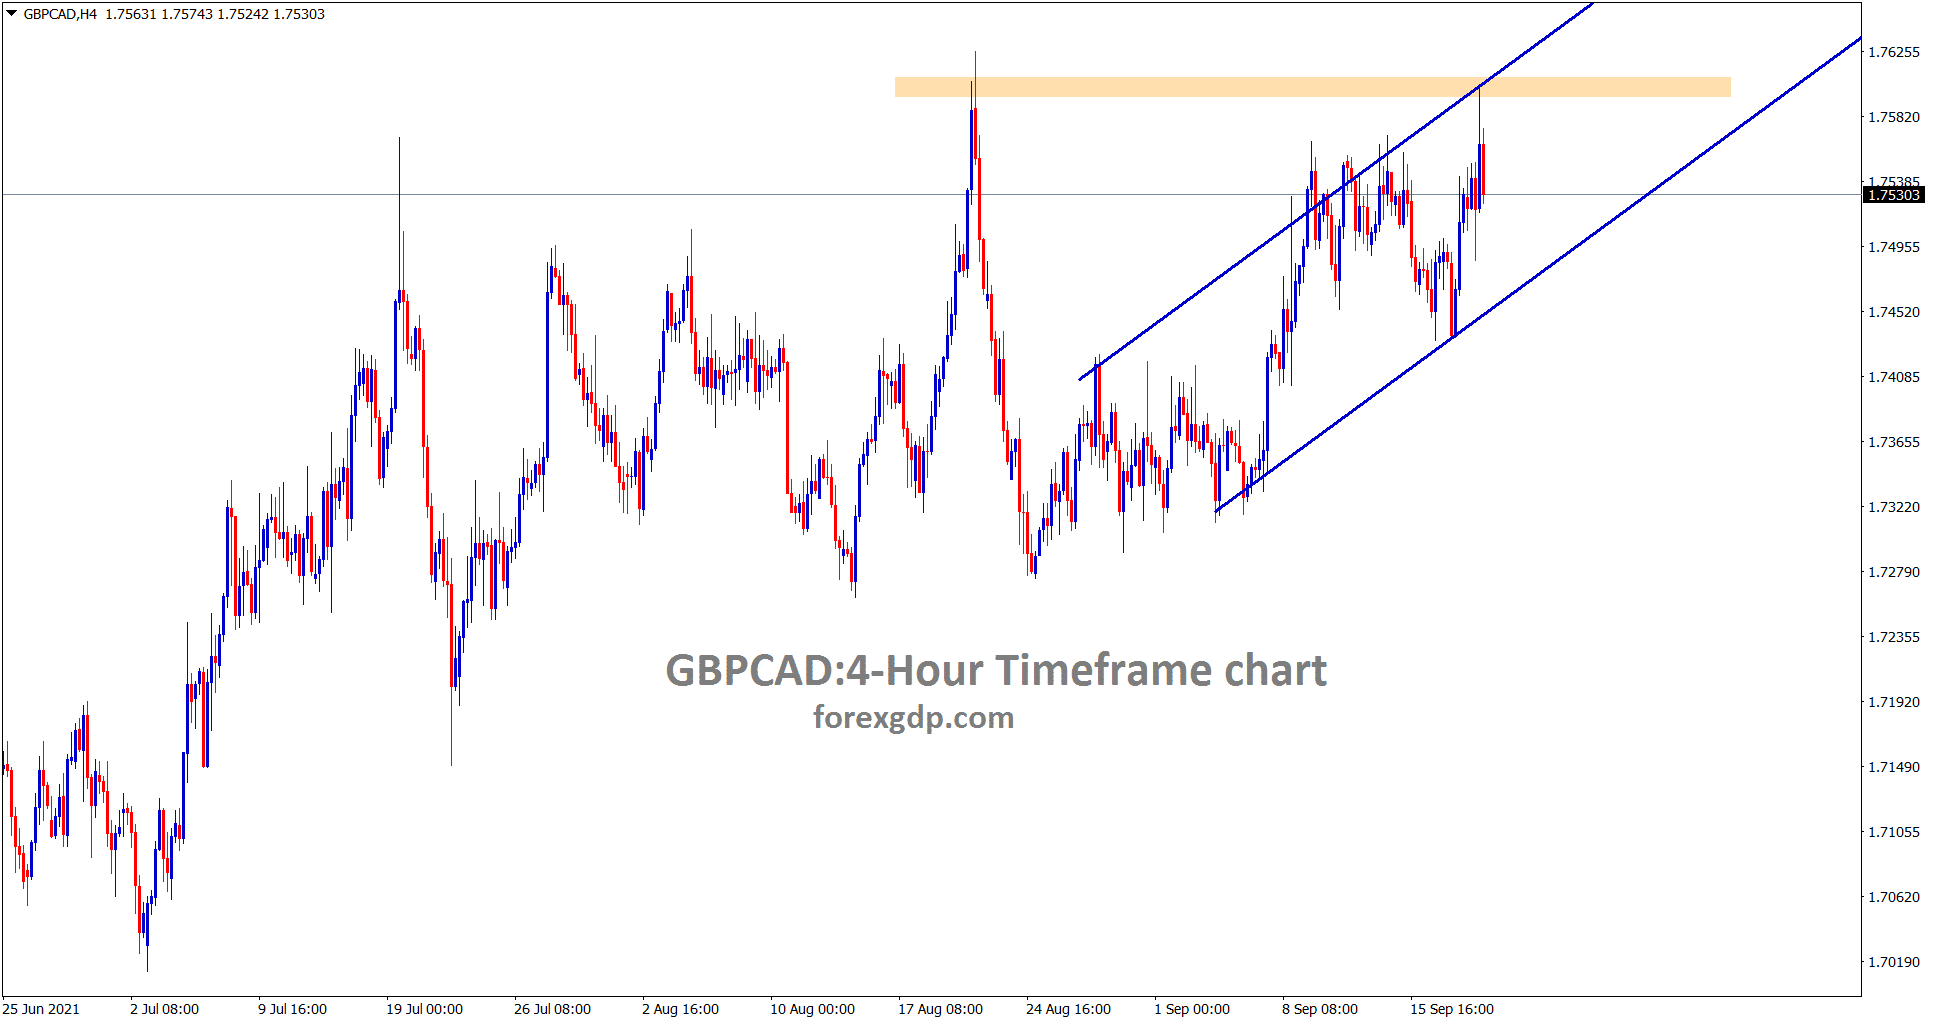 GBPCAD is moving uptrend and reaches the horizontal resistance area